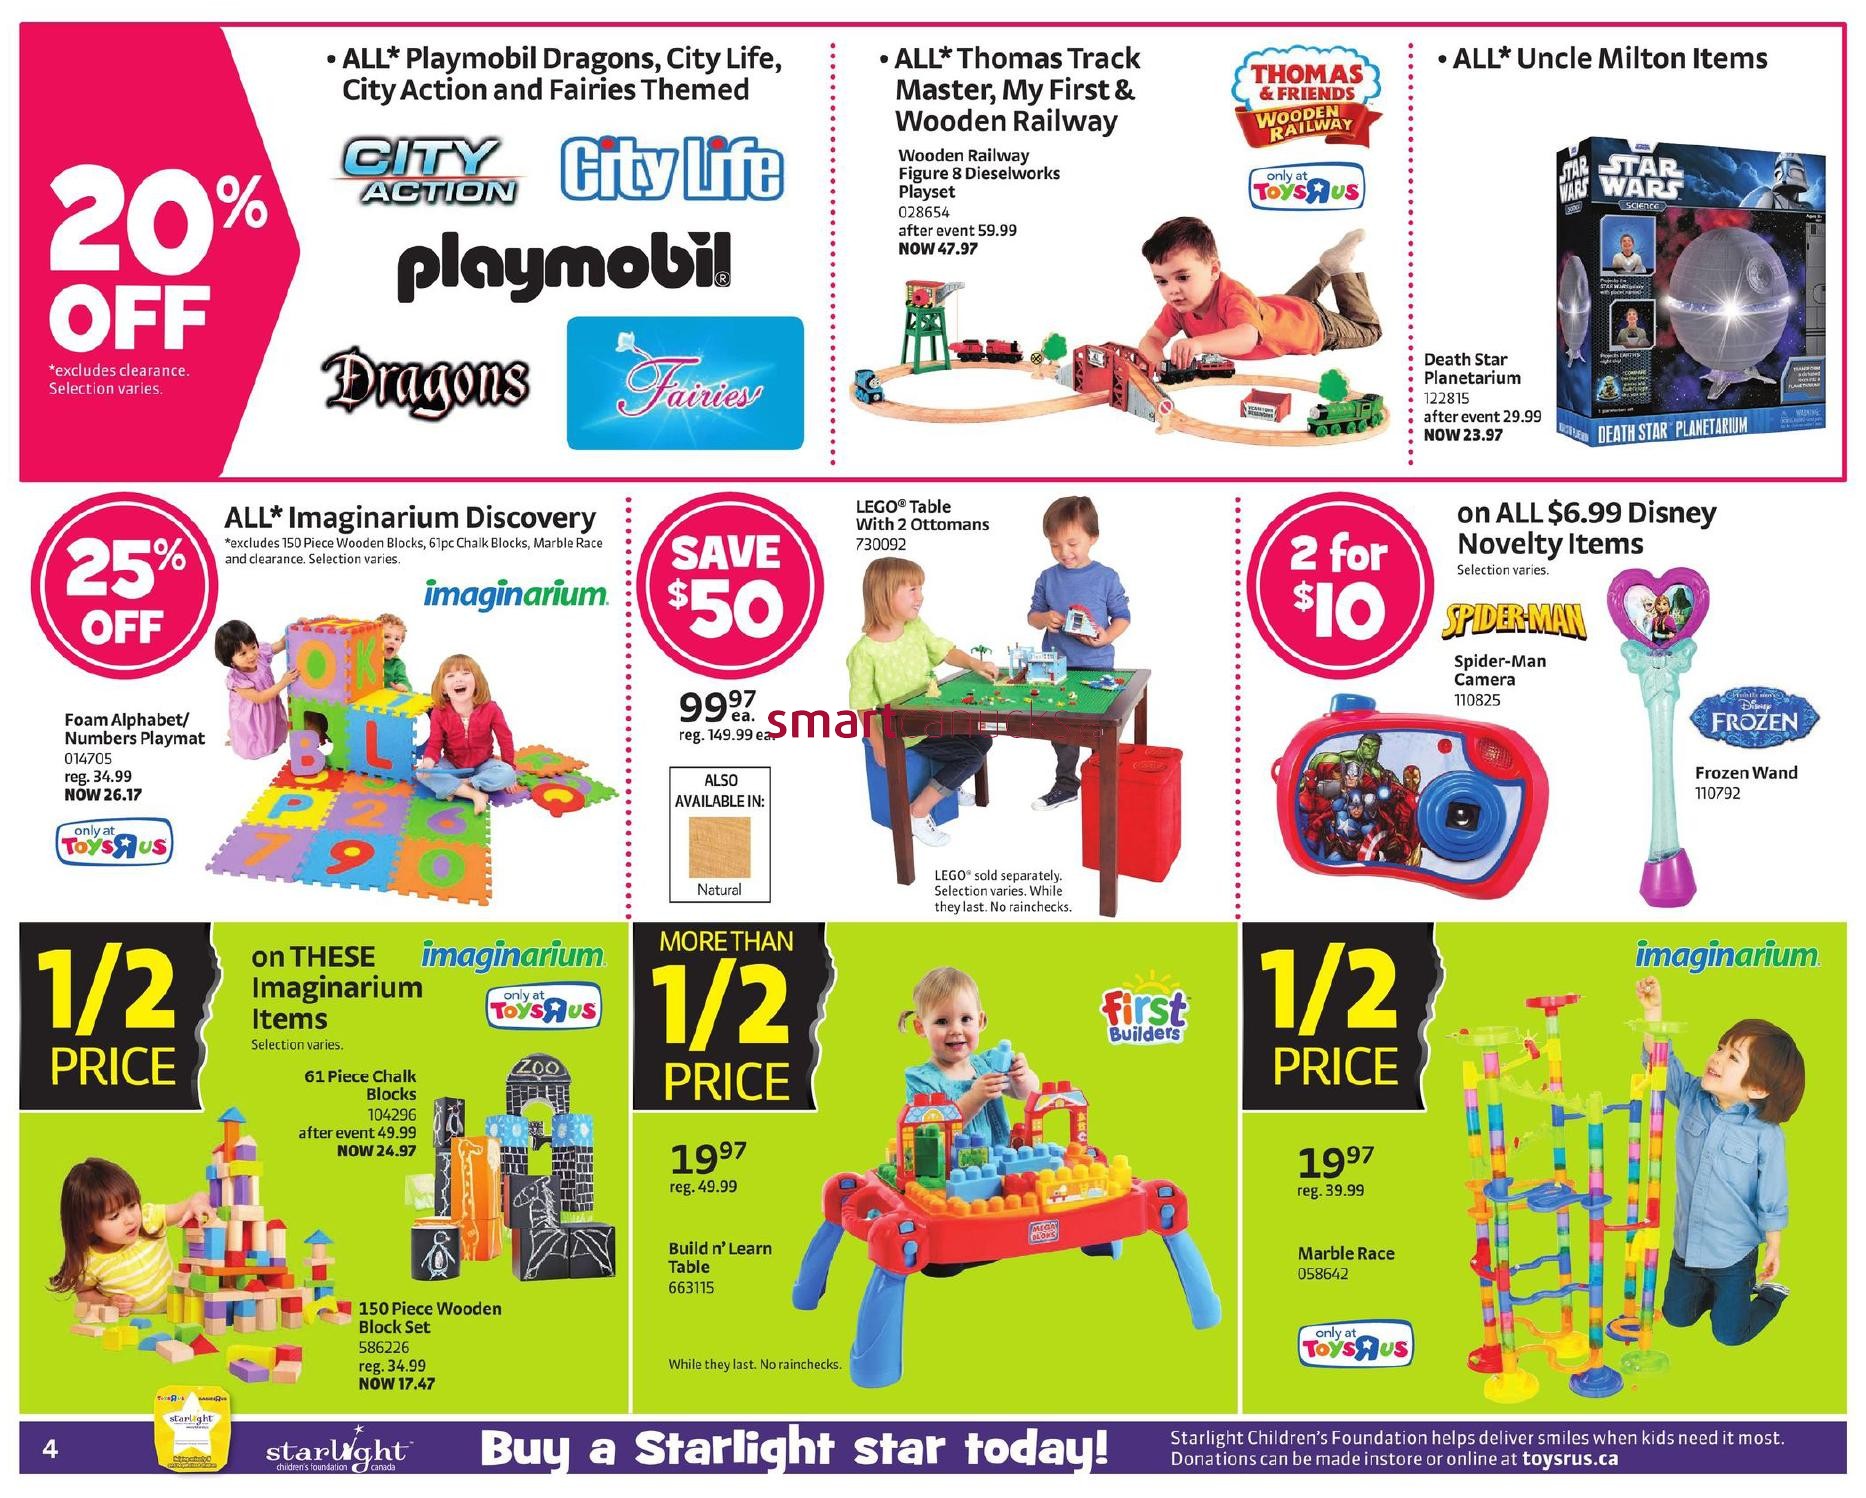 Toys R Us Black Friday Canada 2014 Flyer, Sales and Deals! › Black